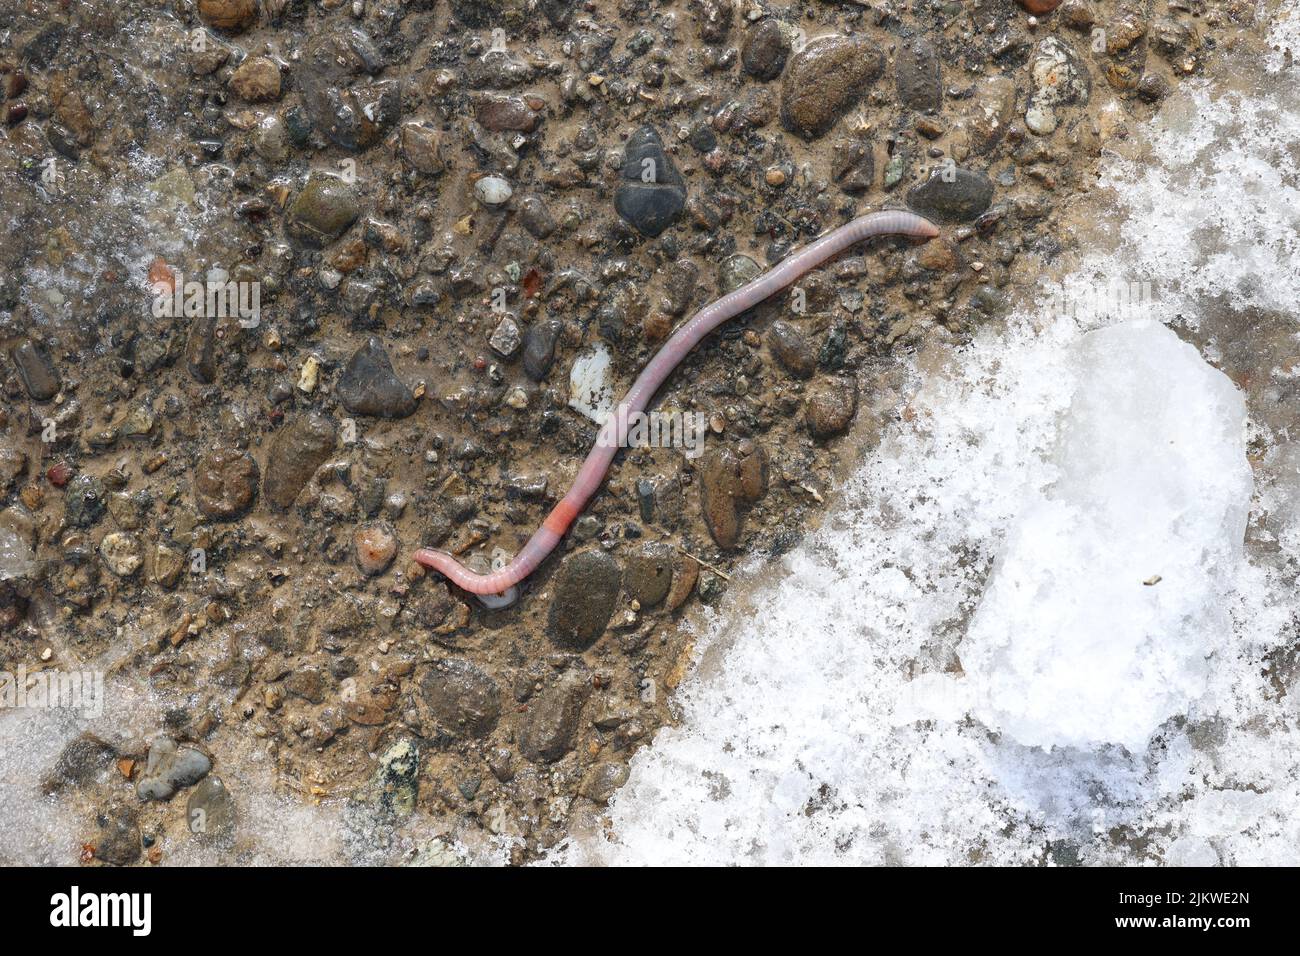 Earthworm after the rain crawled out on the asphalt. Stock Photo